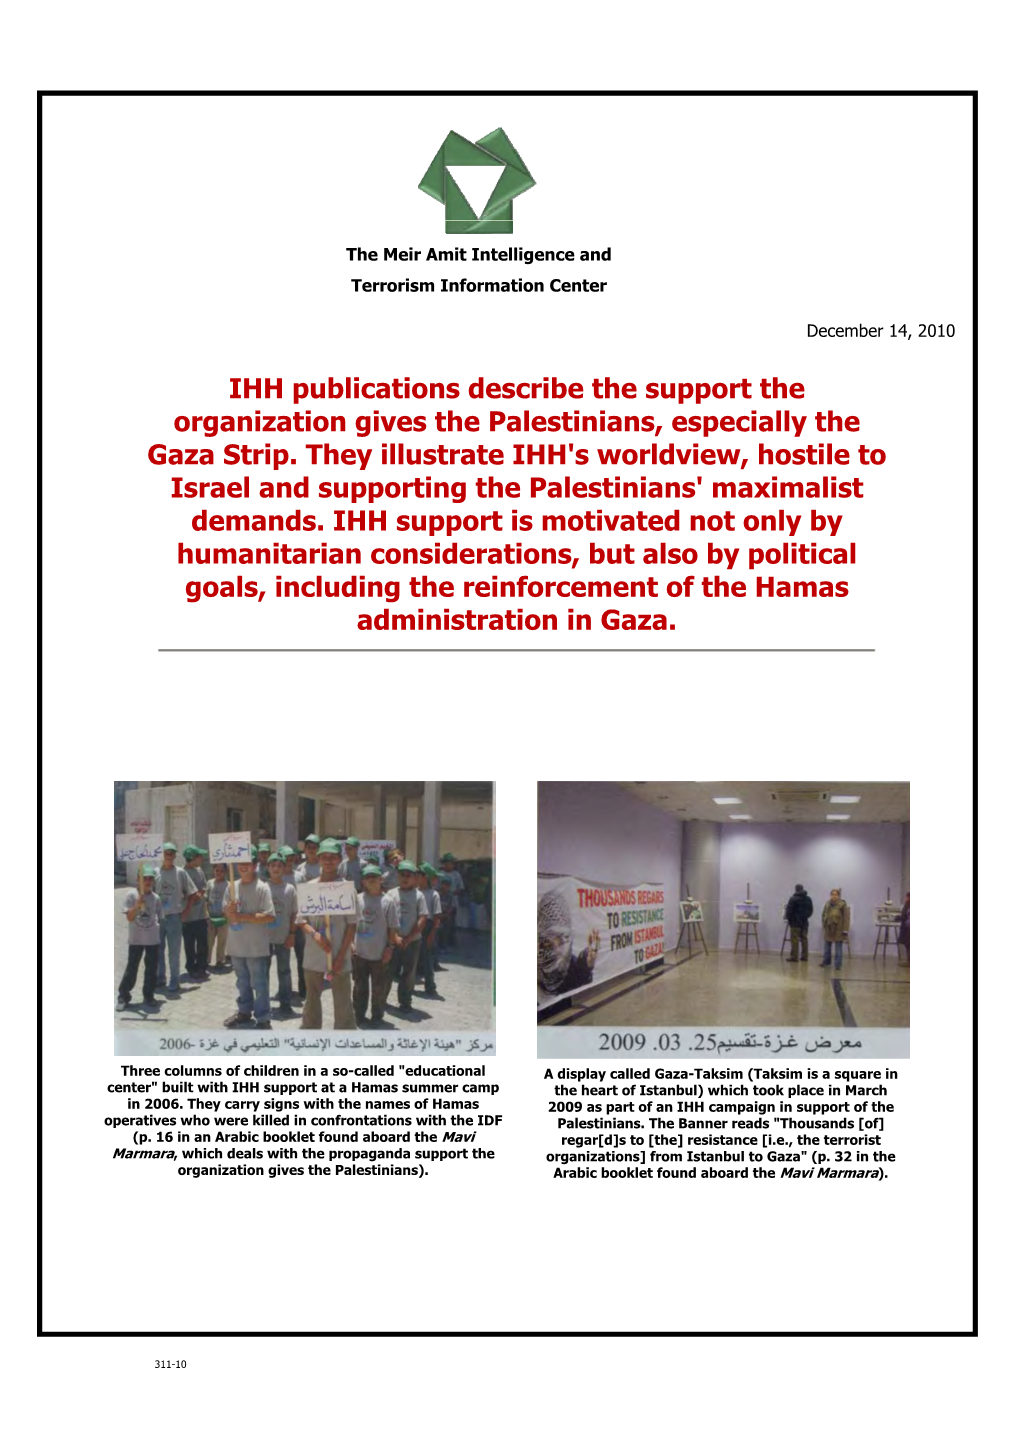 IHH Publications Describe the Support the Organization Gives the Palestinians, Especially the Gaza Strip